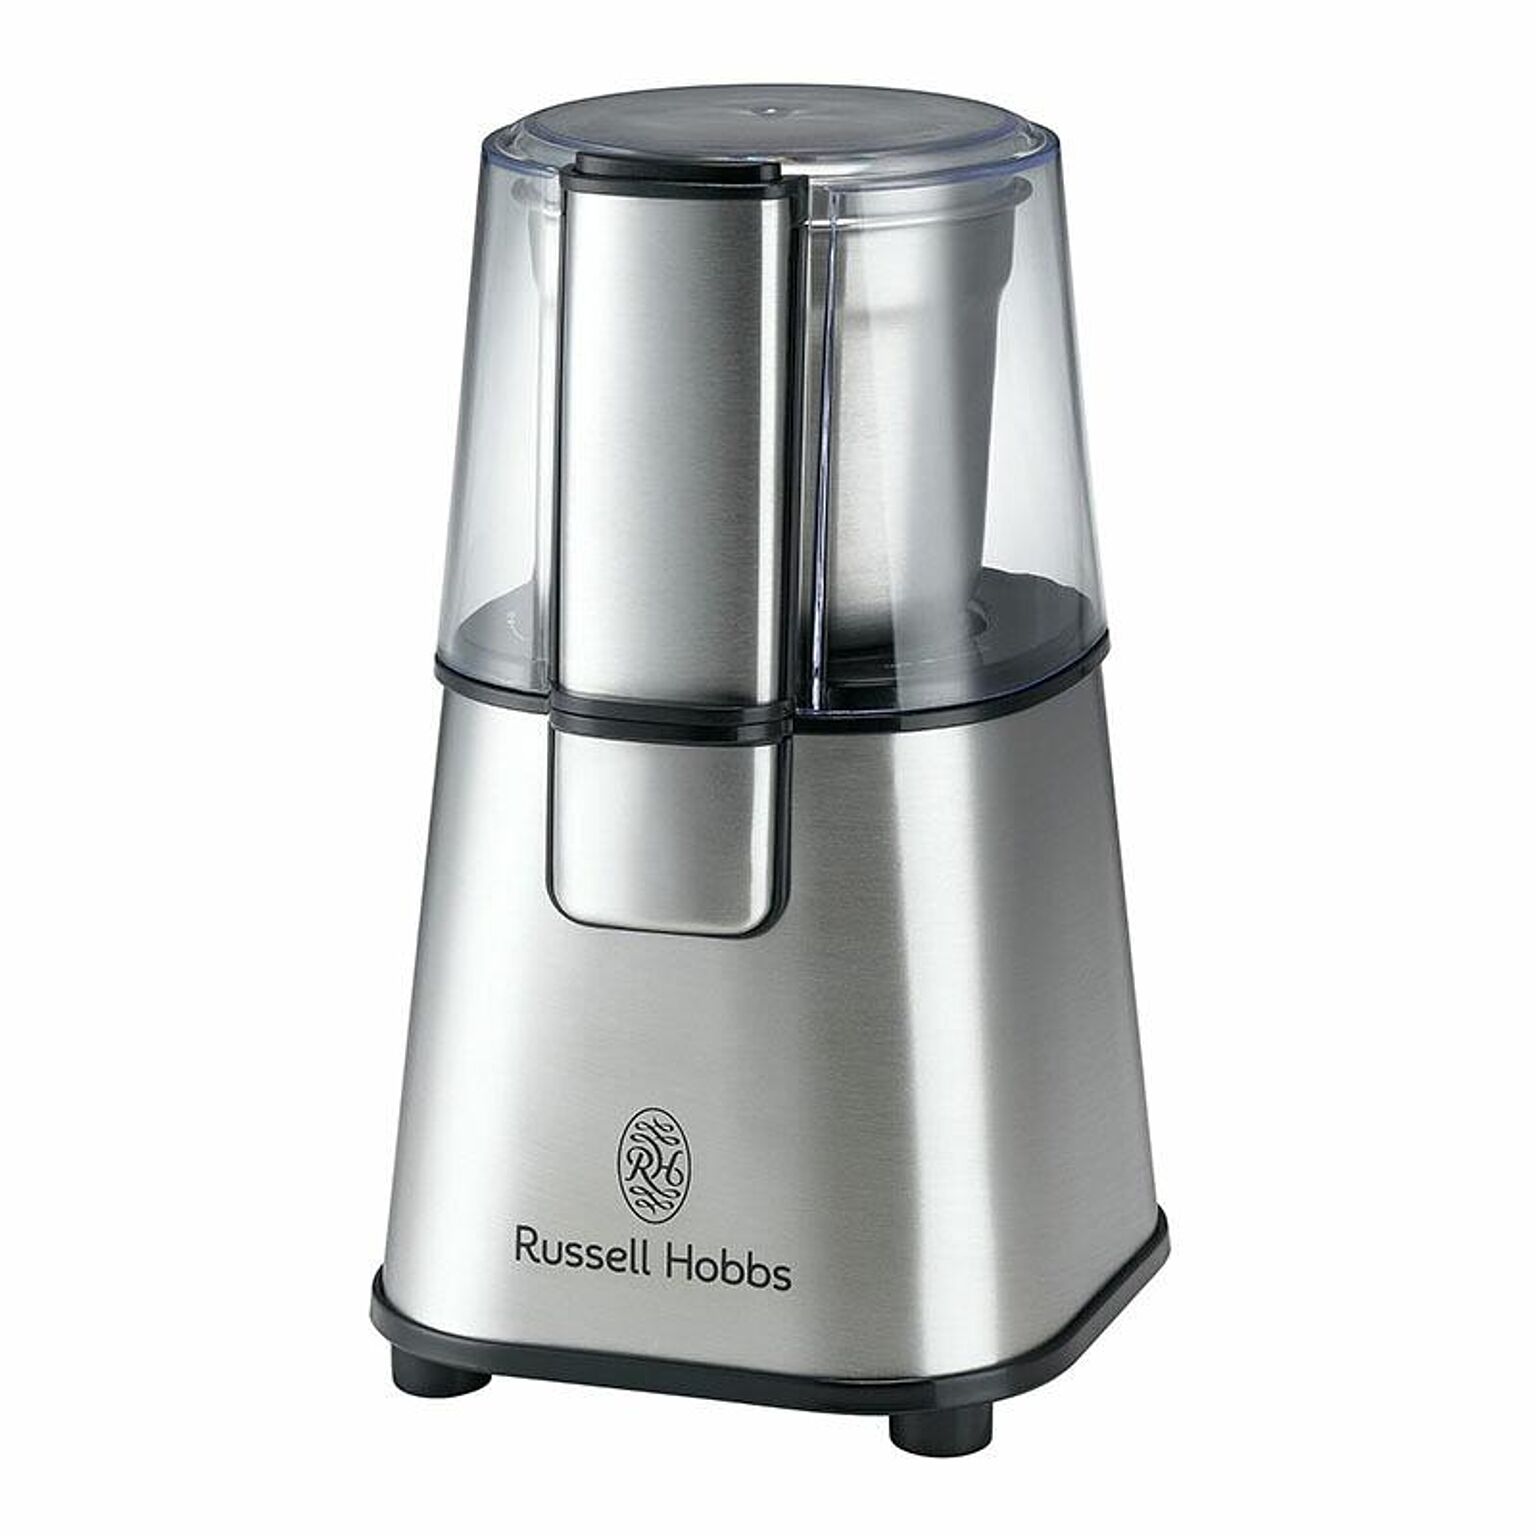 Russell Hobbs / <br class="sp"/>COFFEE GRINDER